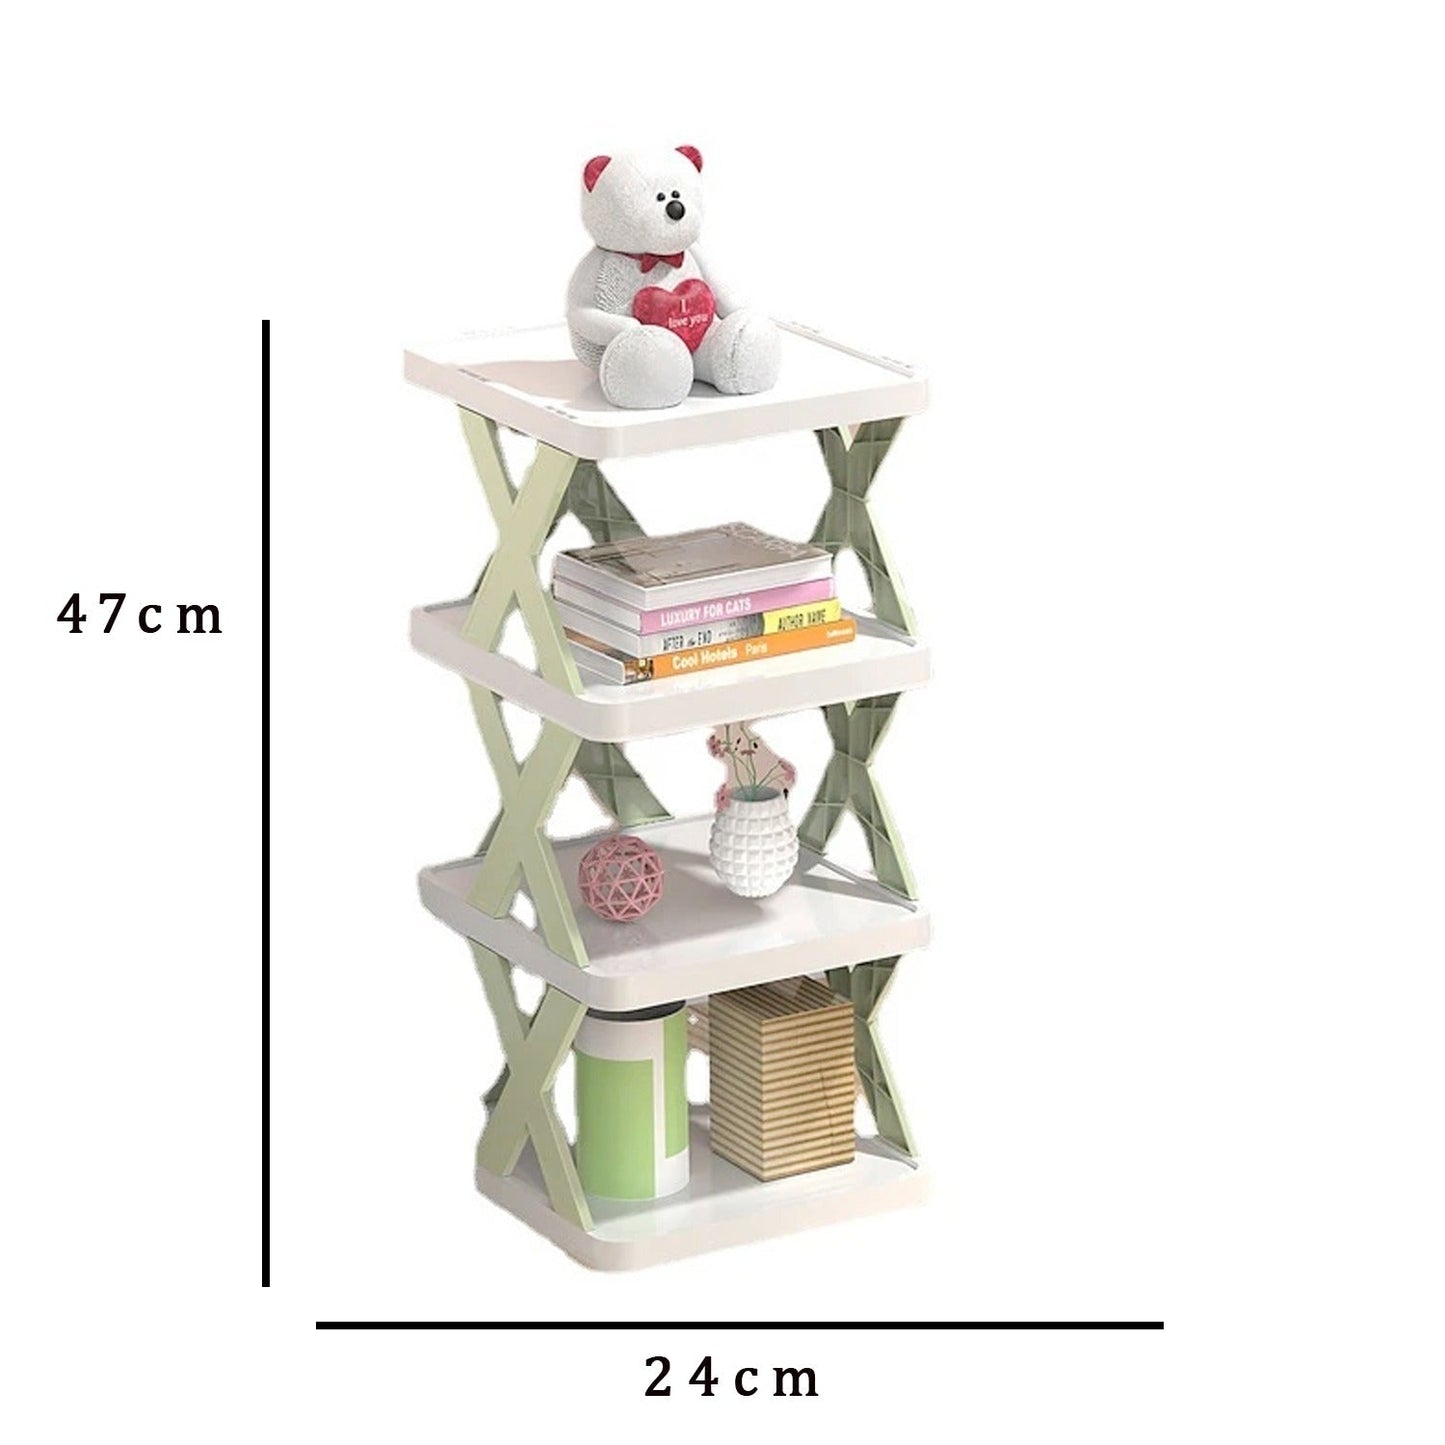 9078   4 LAYER SHOES STAND, SHOE TOWER RACK SUIT FOR SMALL SPACES, CLOSET, SMALL ENTRYWAY, EASY ASSEMBLY AND STABLE IN STRUCTURE, CORNER STORAGE CABINET FOR SAVING SPACE